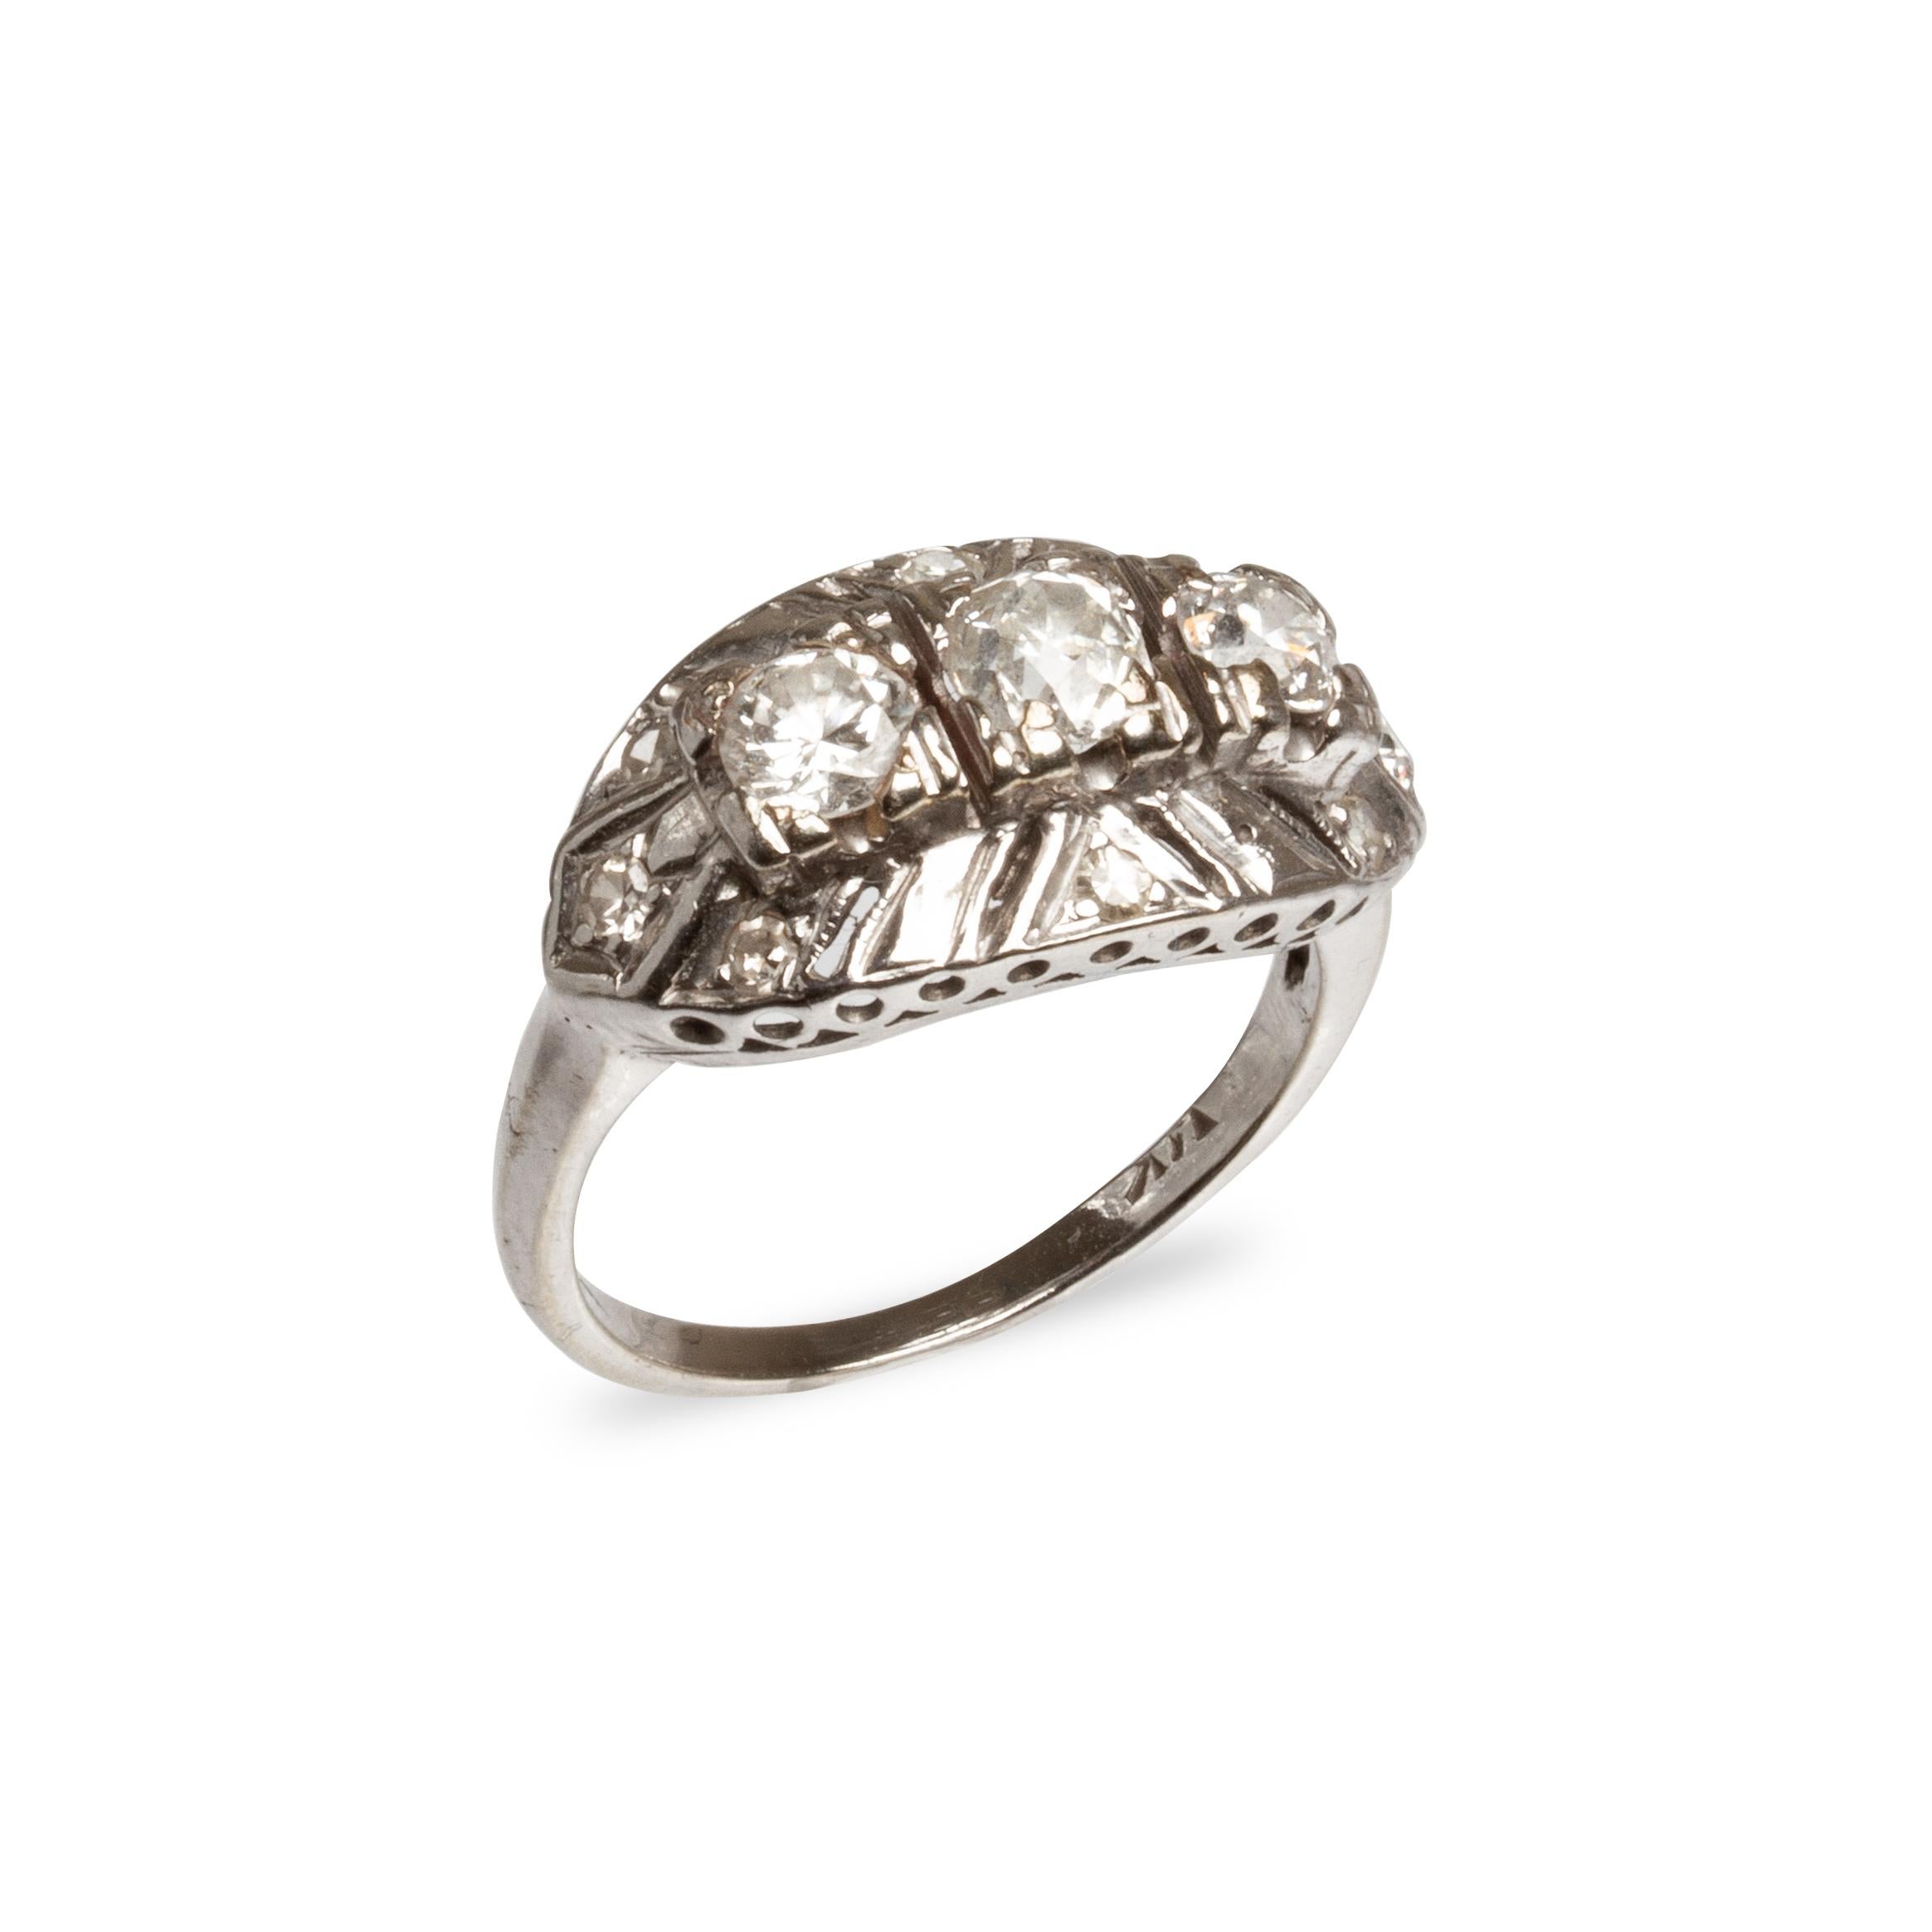 Art Deco Style White gold and diamond Ring circa 1950 s6.5. Total weight approx .94ct. Weighs 2.6dwt. This item is accompanied by a GIA appraisers letter from a well respected independent firm that has been in business for over 75 years.